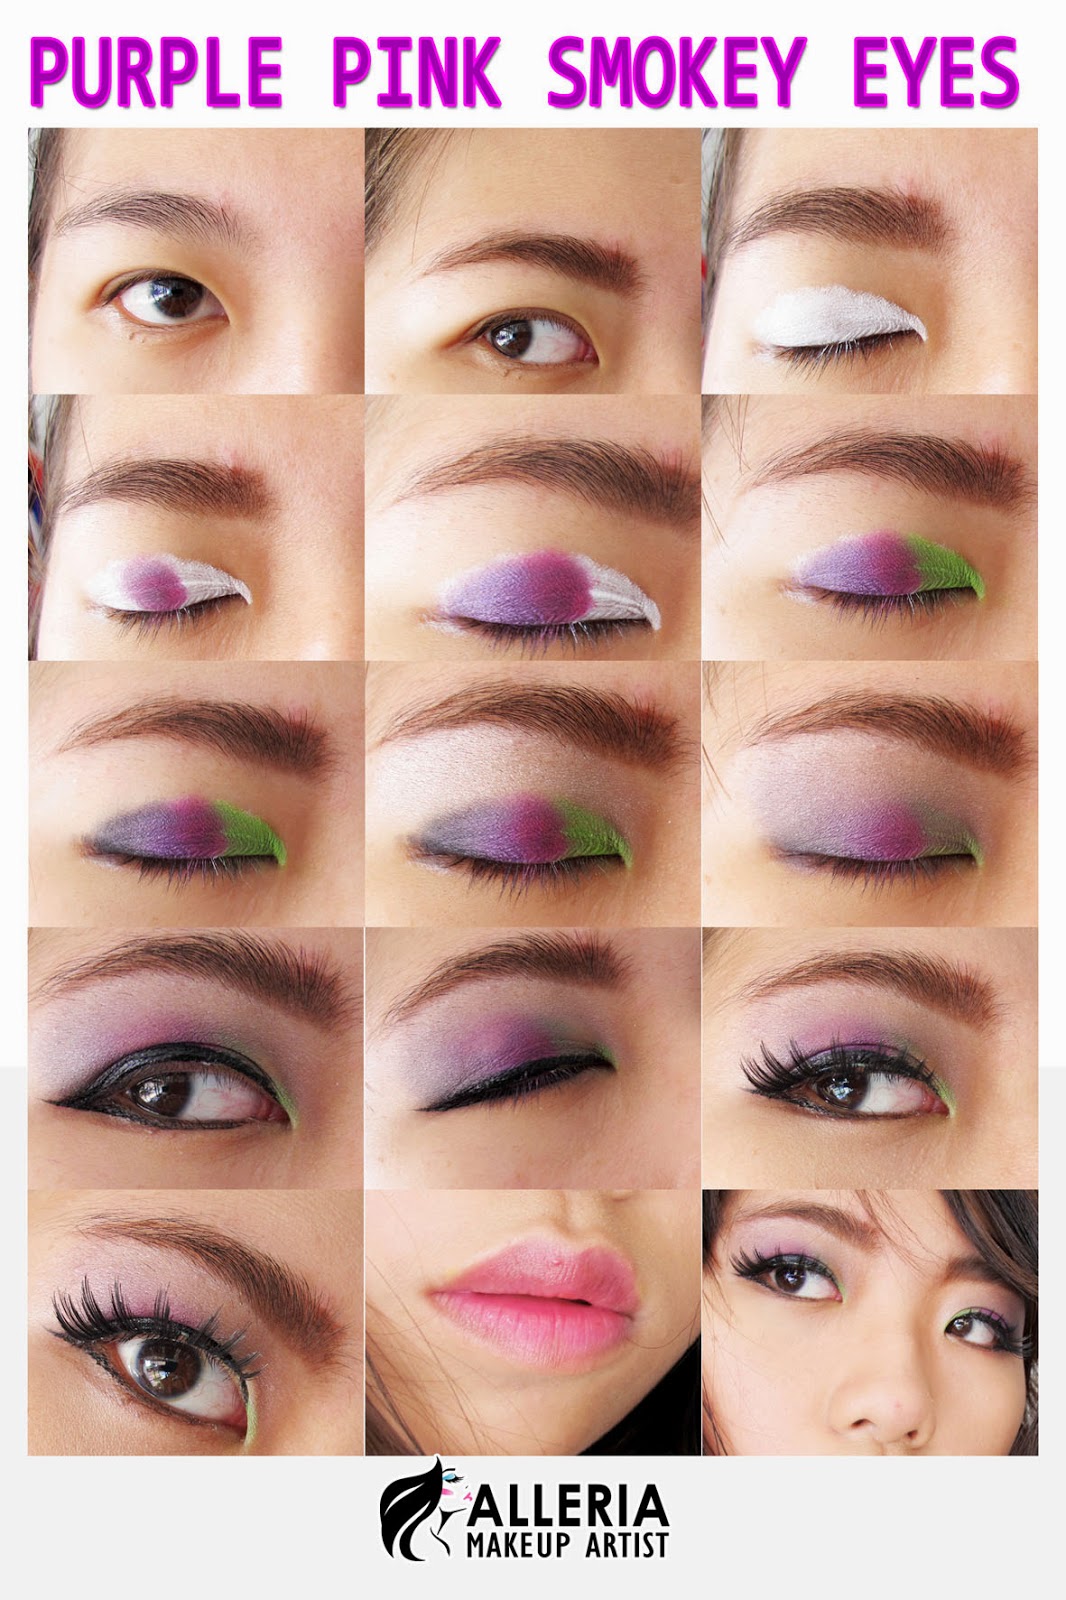 PICTORIAL EYE MAKEUP SHARE LEARN PLAY FUN JUST FOR FUN